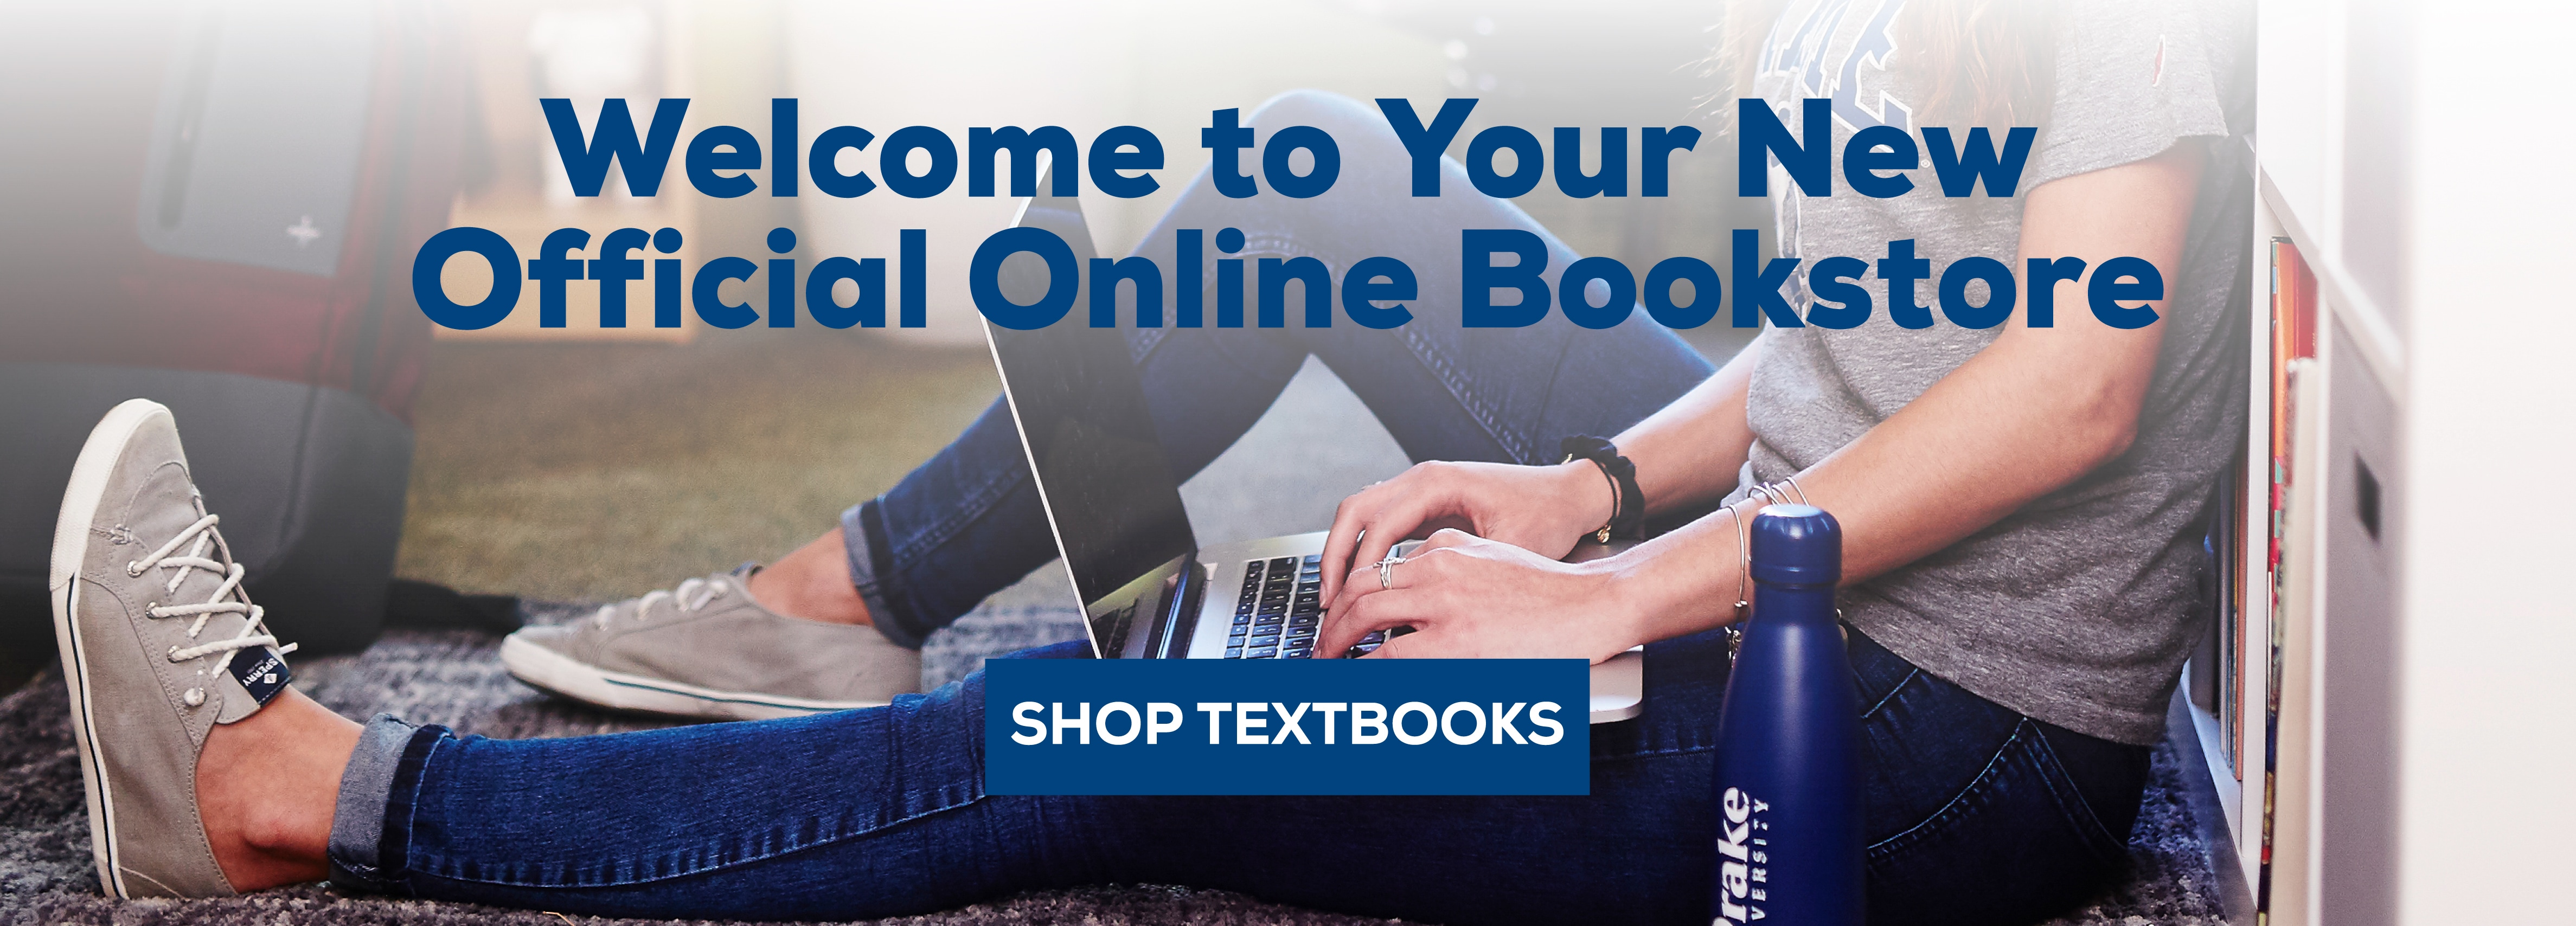 Welcome to your official online bookstore - Flexible purchasing options! Shop textbooks